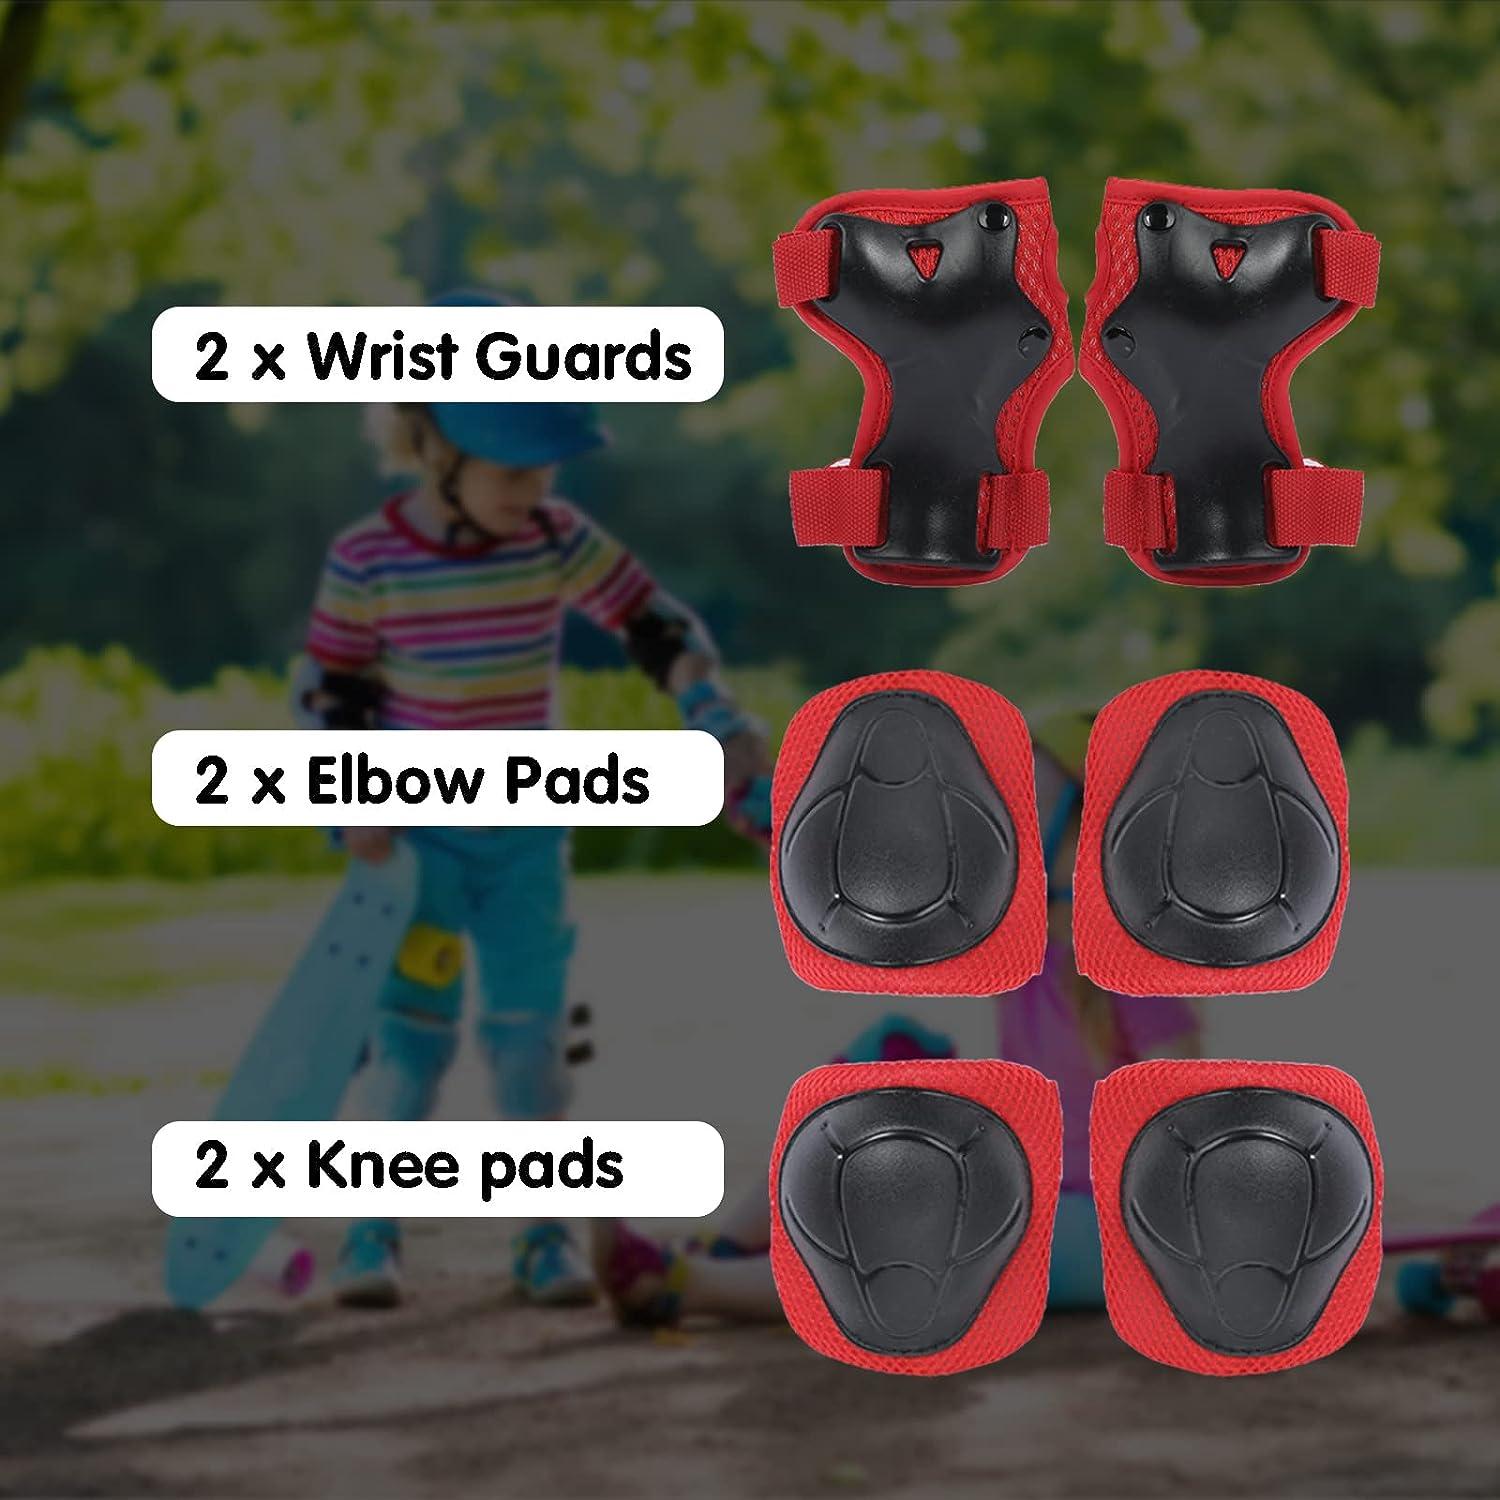 Atphfety Kids Helmet Set,Toddler Helmet for Boys Girls Age 3-8 with Knee  Elbow Pads Wrist Guards for Bike Skating Skateboard Cycling Scooter  Rollerblading S:50 cm - 54cm/19.7-21.2 inch Spider